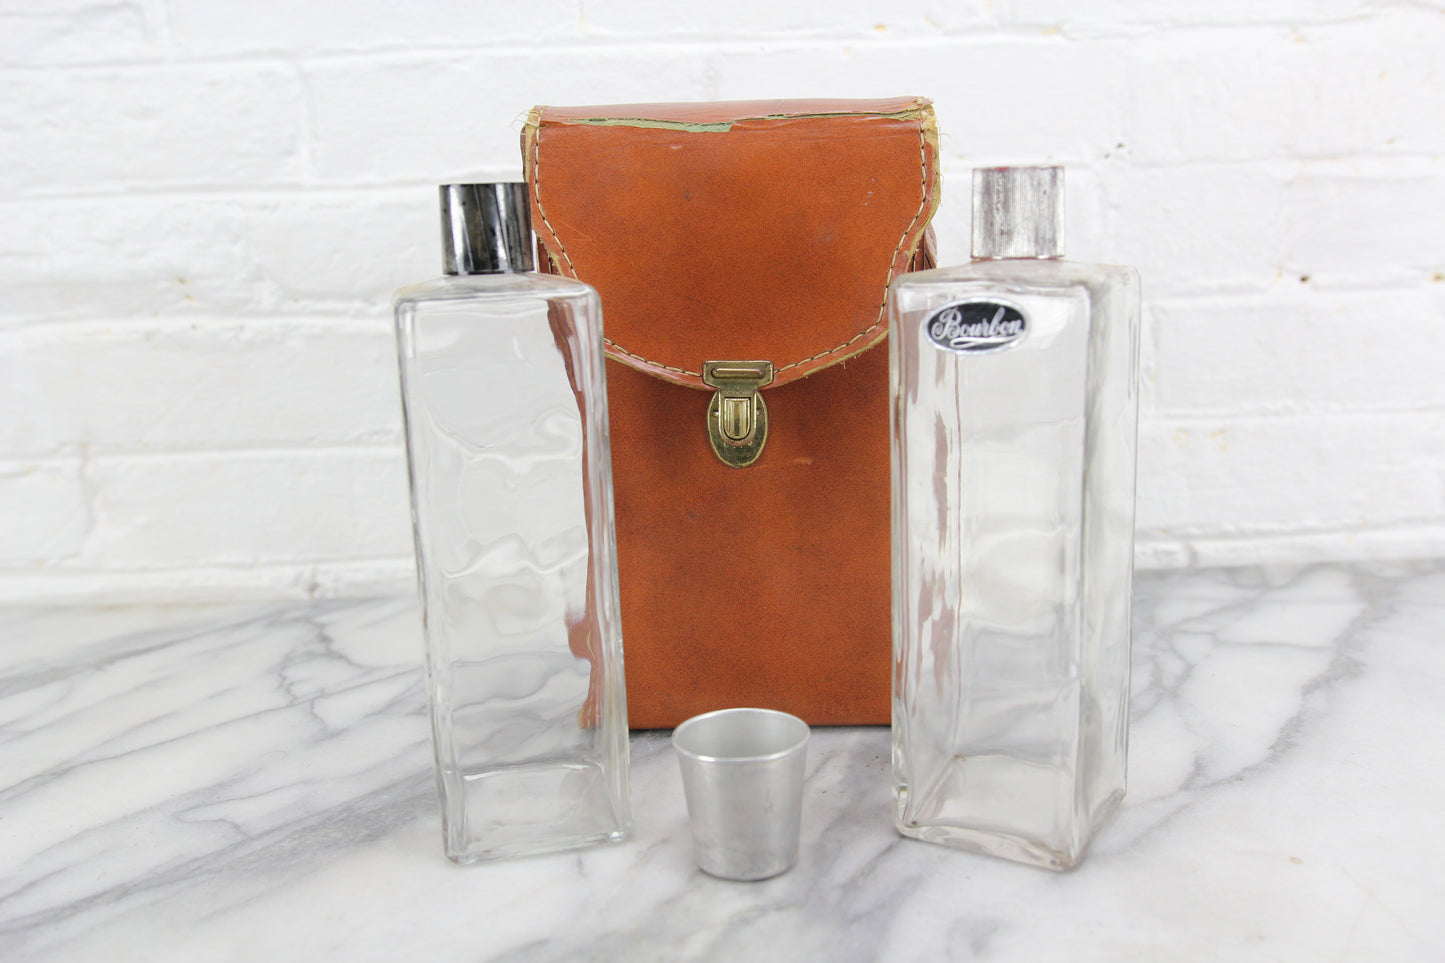 Travel-sized Mini-Bar in Leather Case with Two Liquor Bottles and Shot Glass